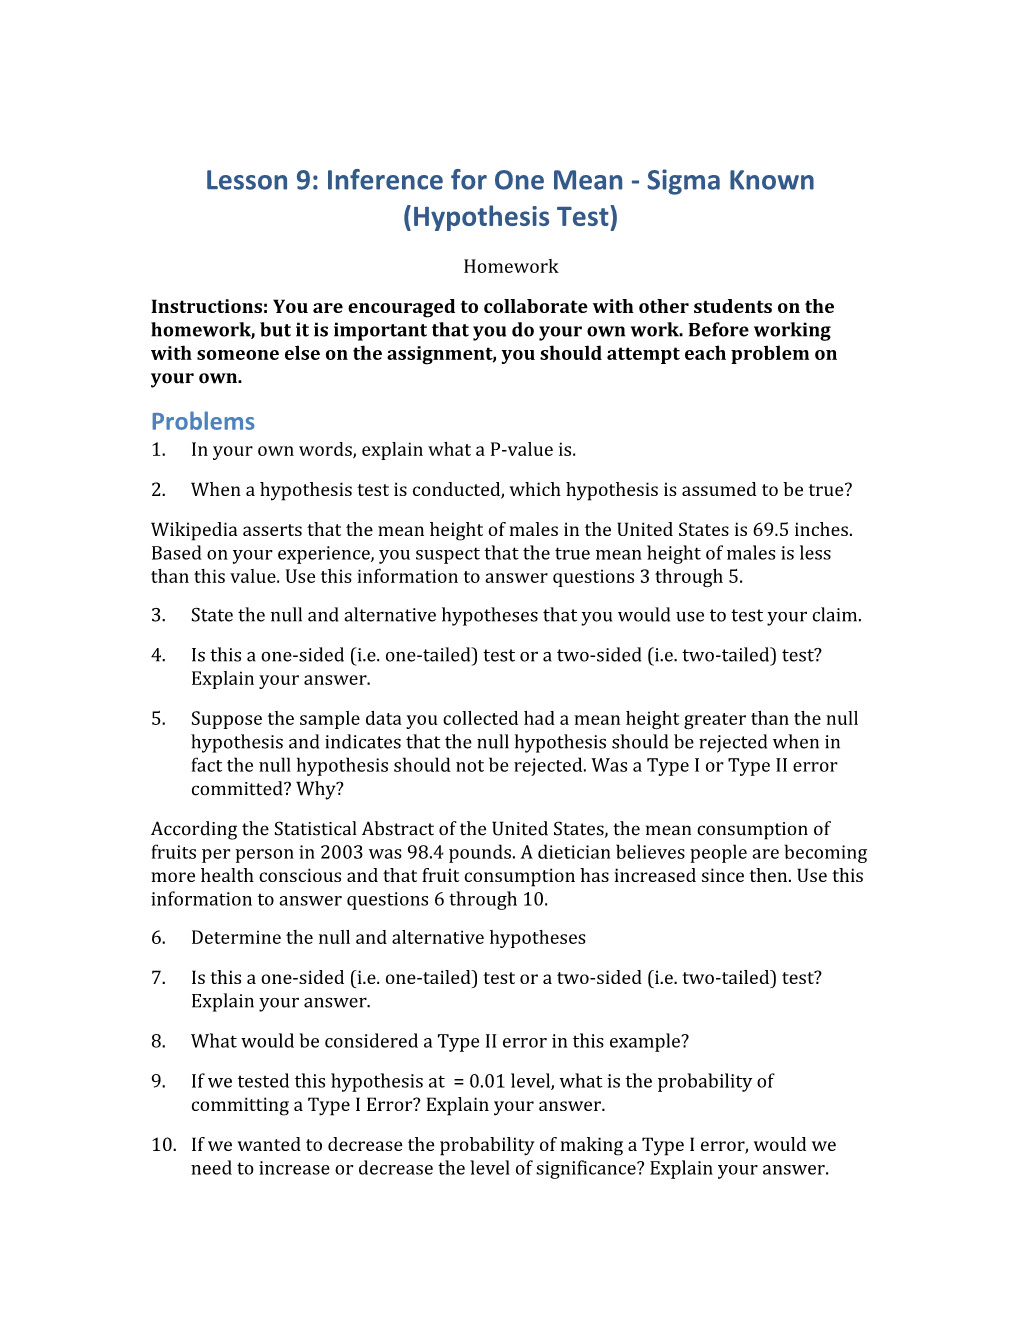 Lesson 9: Inference for One Mean - Sigma Known (Hypothesis Test)